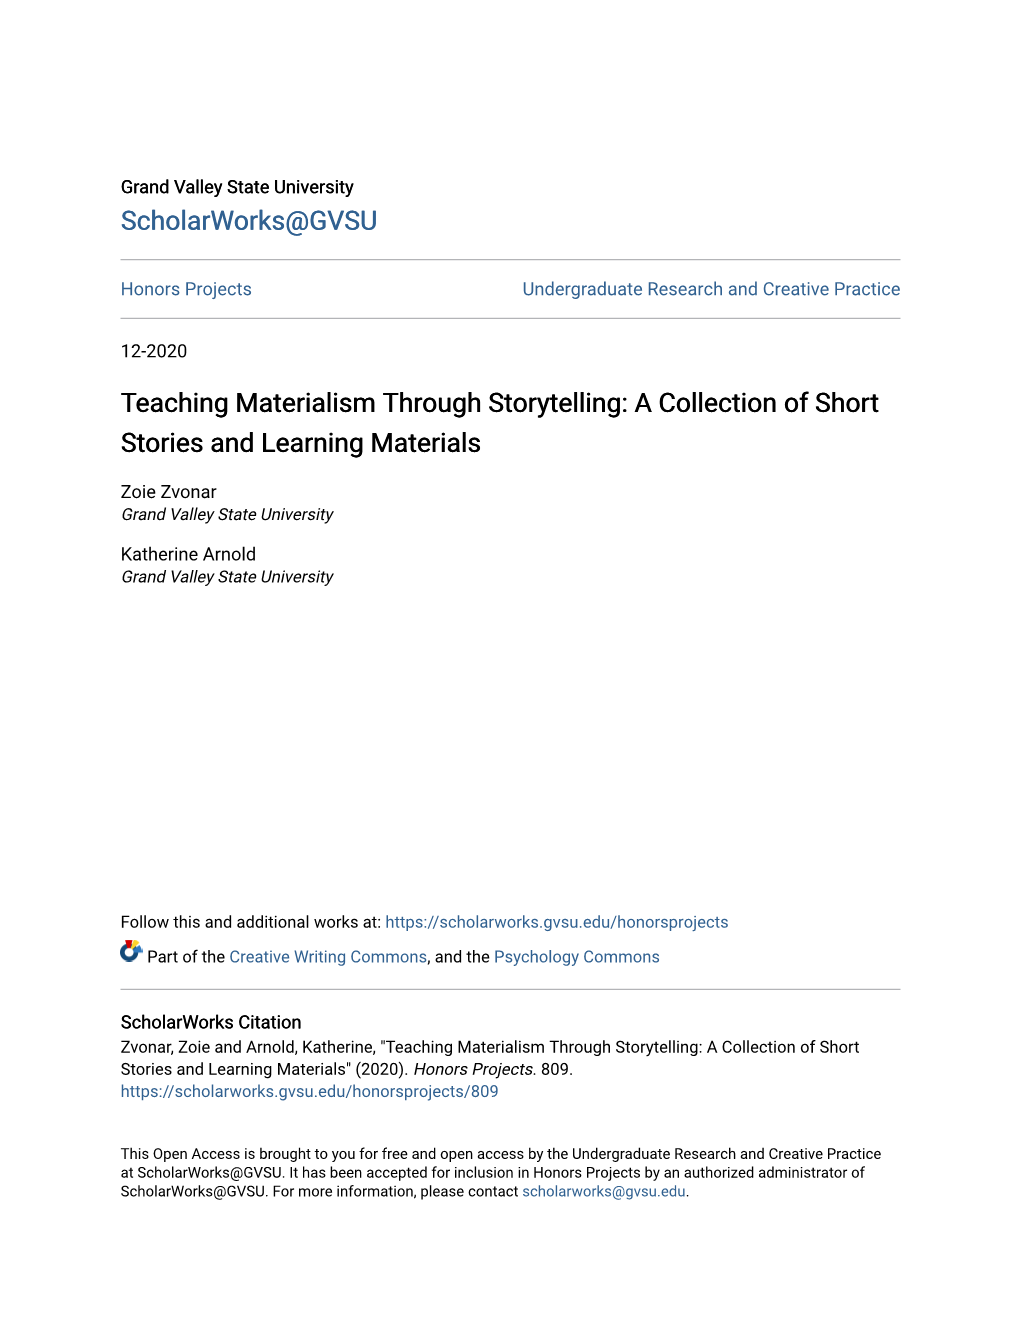 Teaching Materialism Through Storytelling: a Collection of Short Stories and Learning Materials